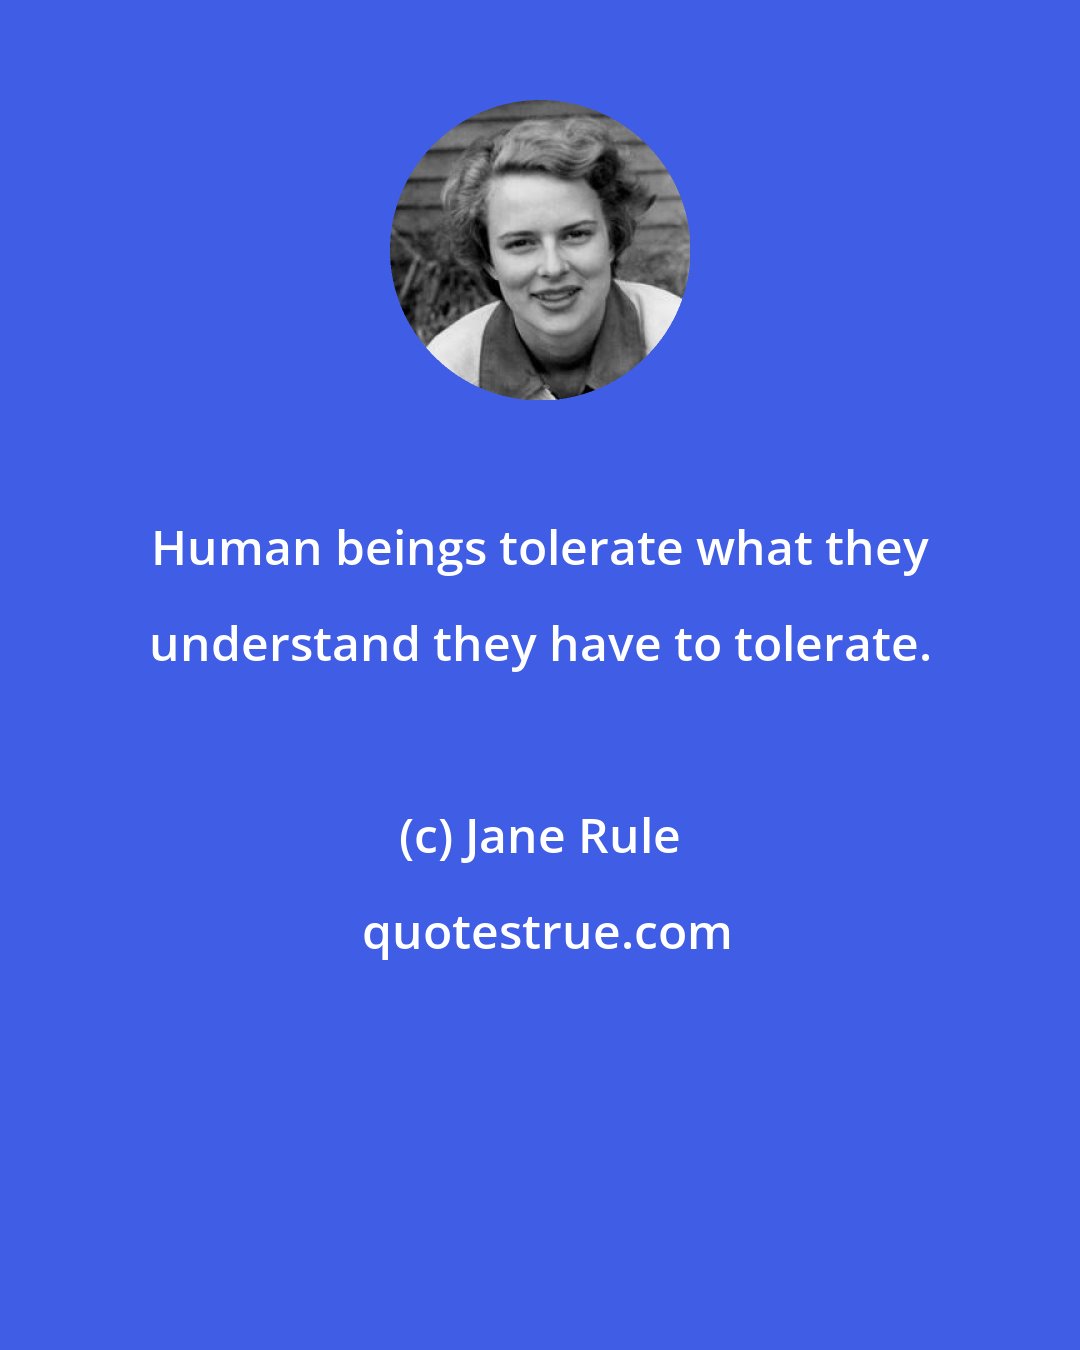 Jane Rule: Human beings tolerate what they understand they have to tolerate.